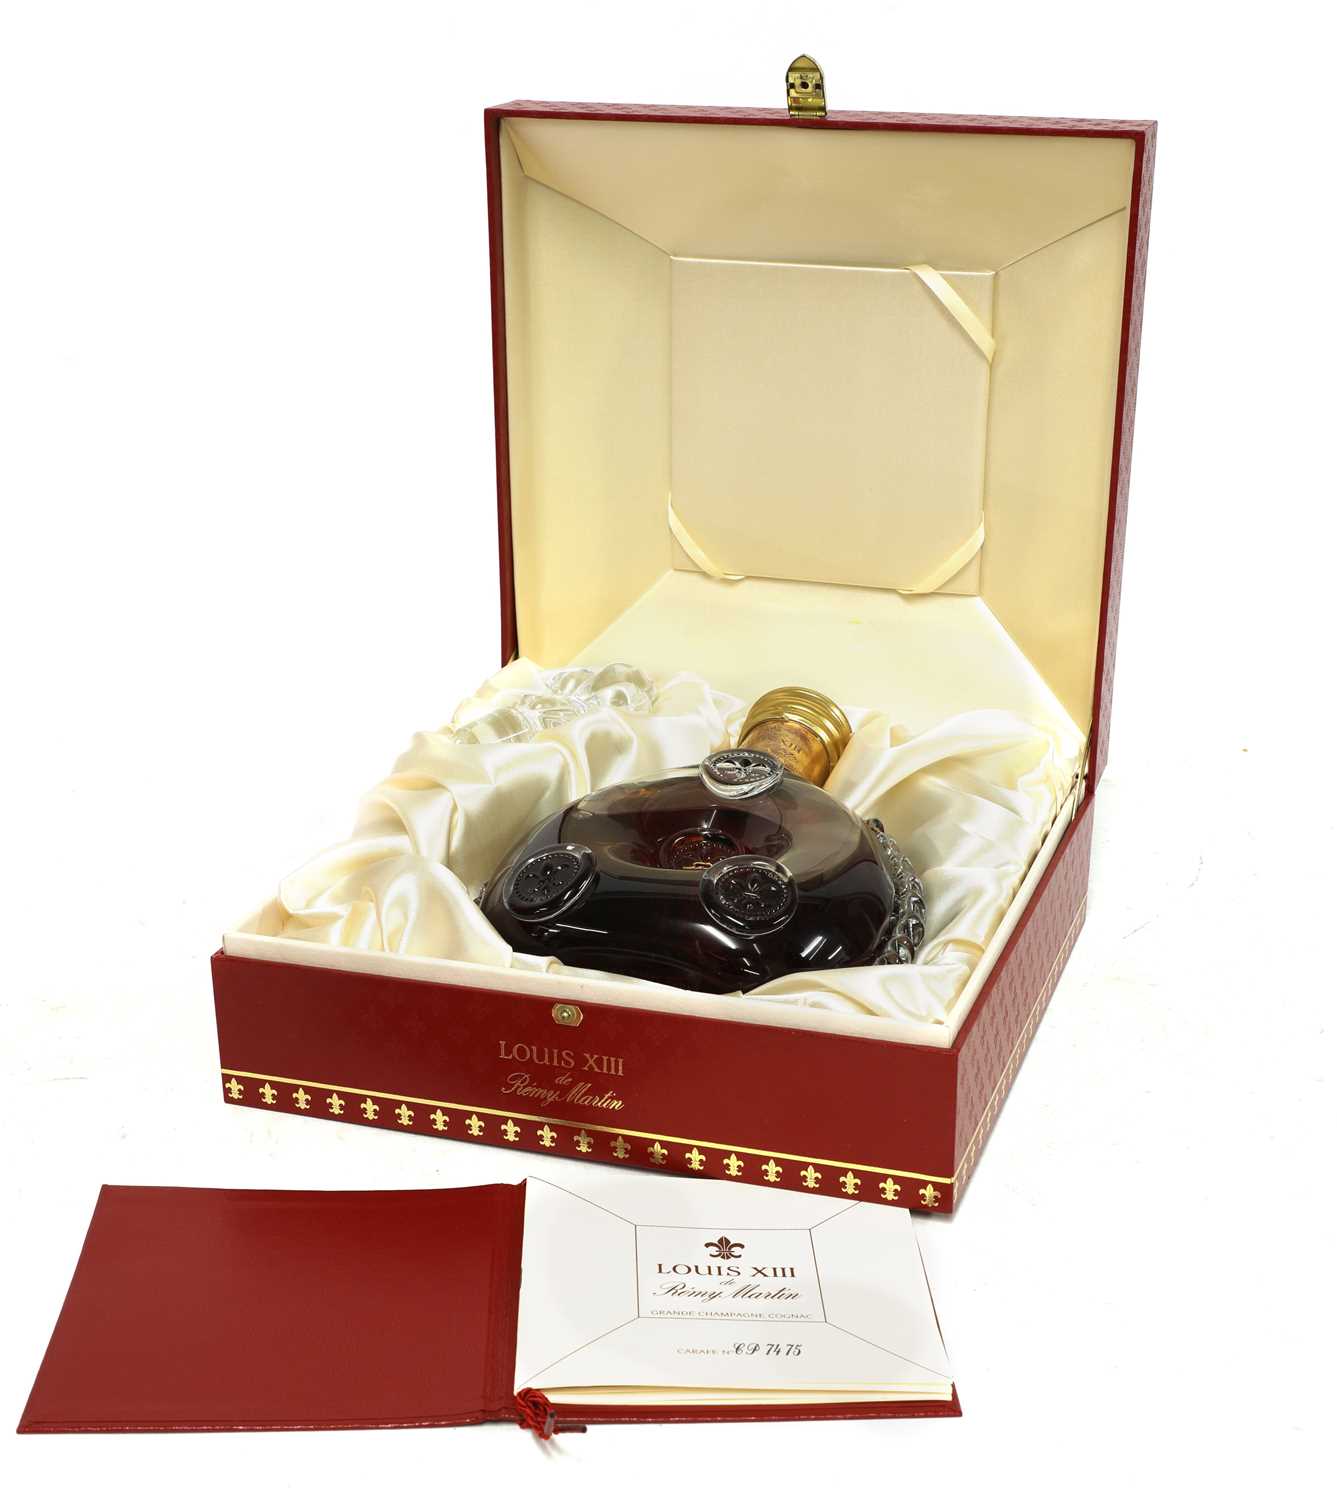 Remy Martin, Louis XIII Grande Champagne Cognac - Image 2 of 3